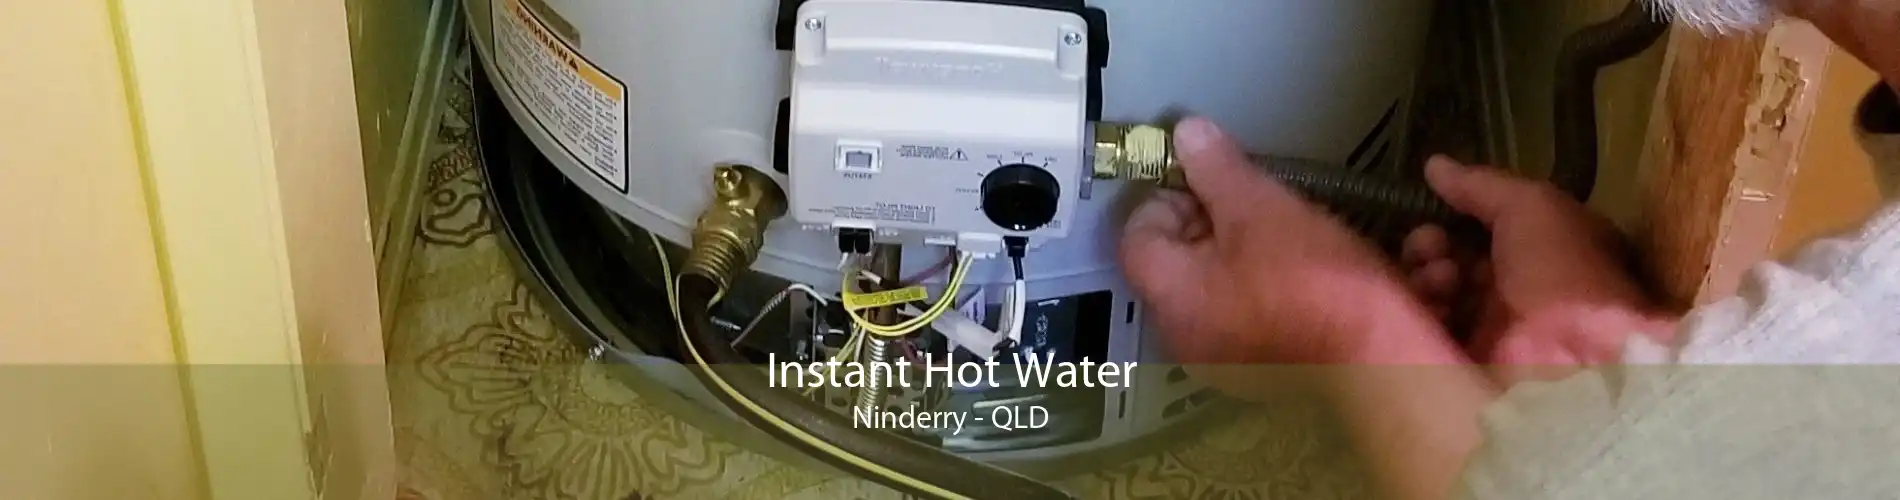 Instant Hot Water Ninderry - QLD